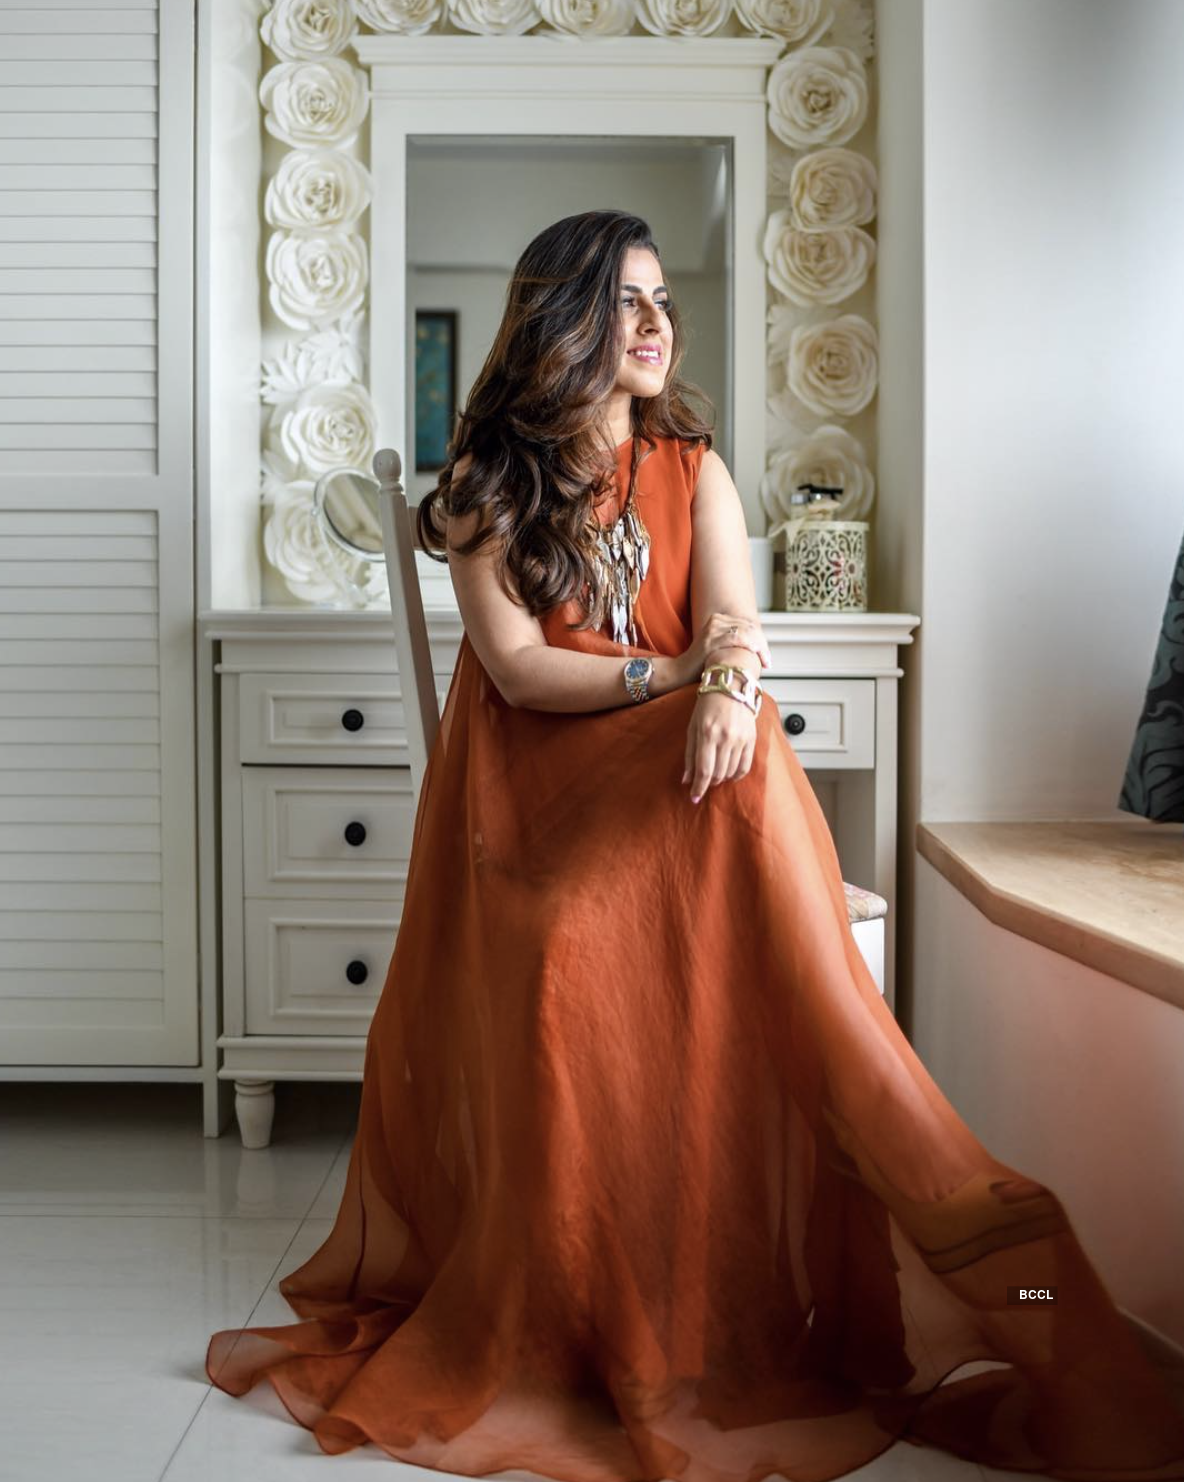 Designer Rohina Anand Khira has designed a life right out of Pinterest...